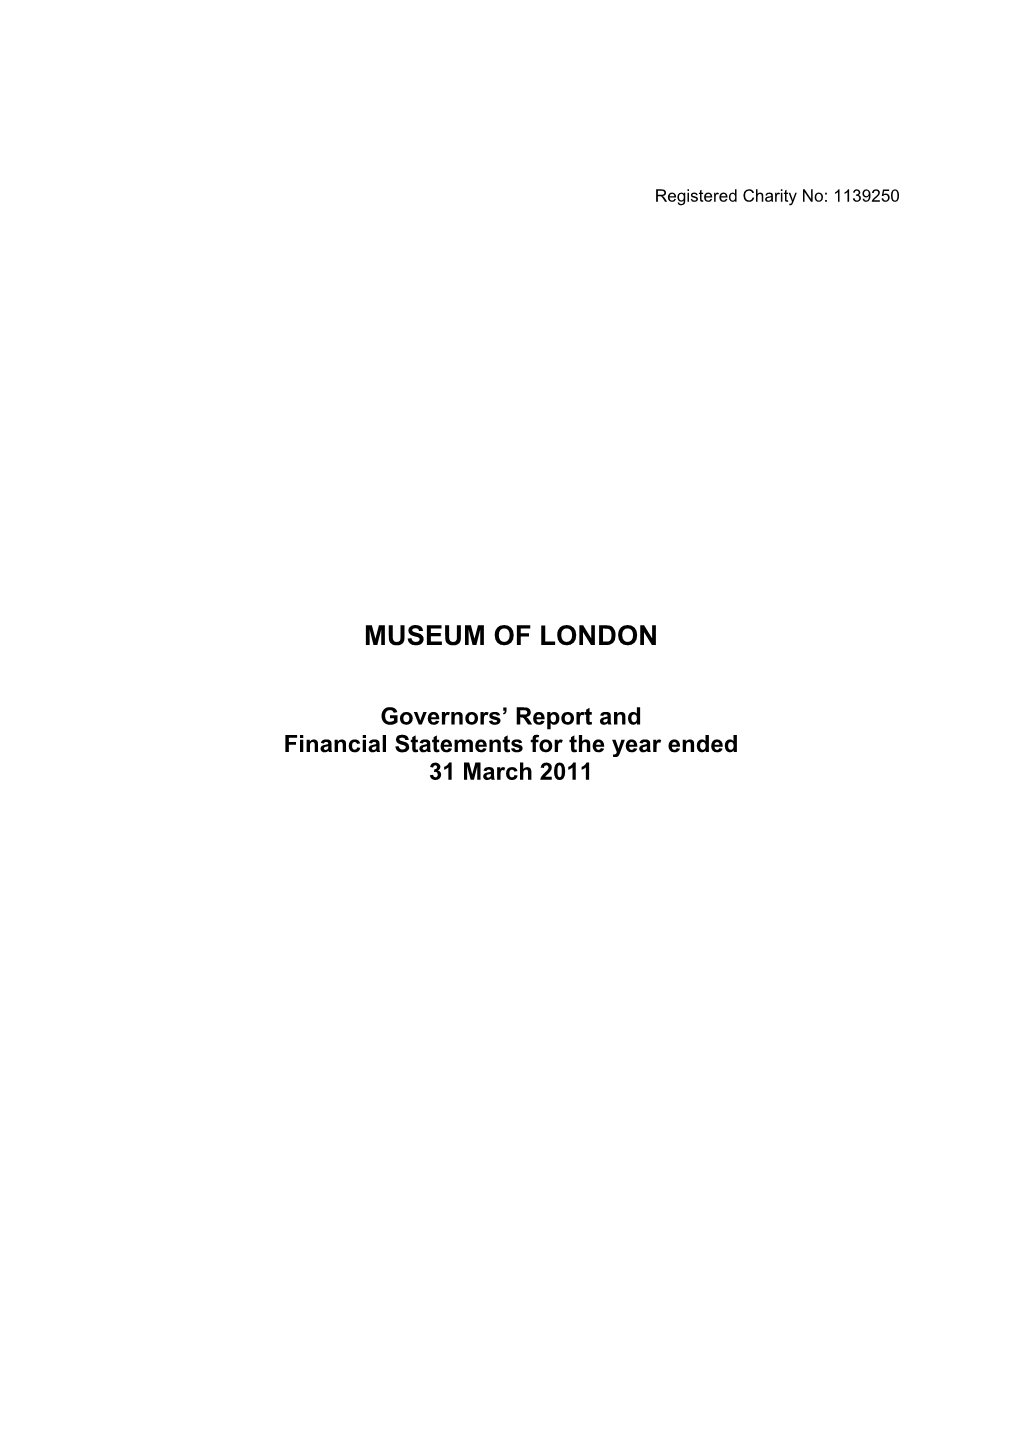 Museum of London Governors' Report and Financial Statements for The